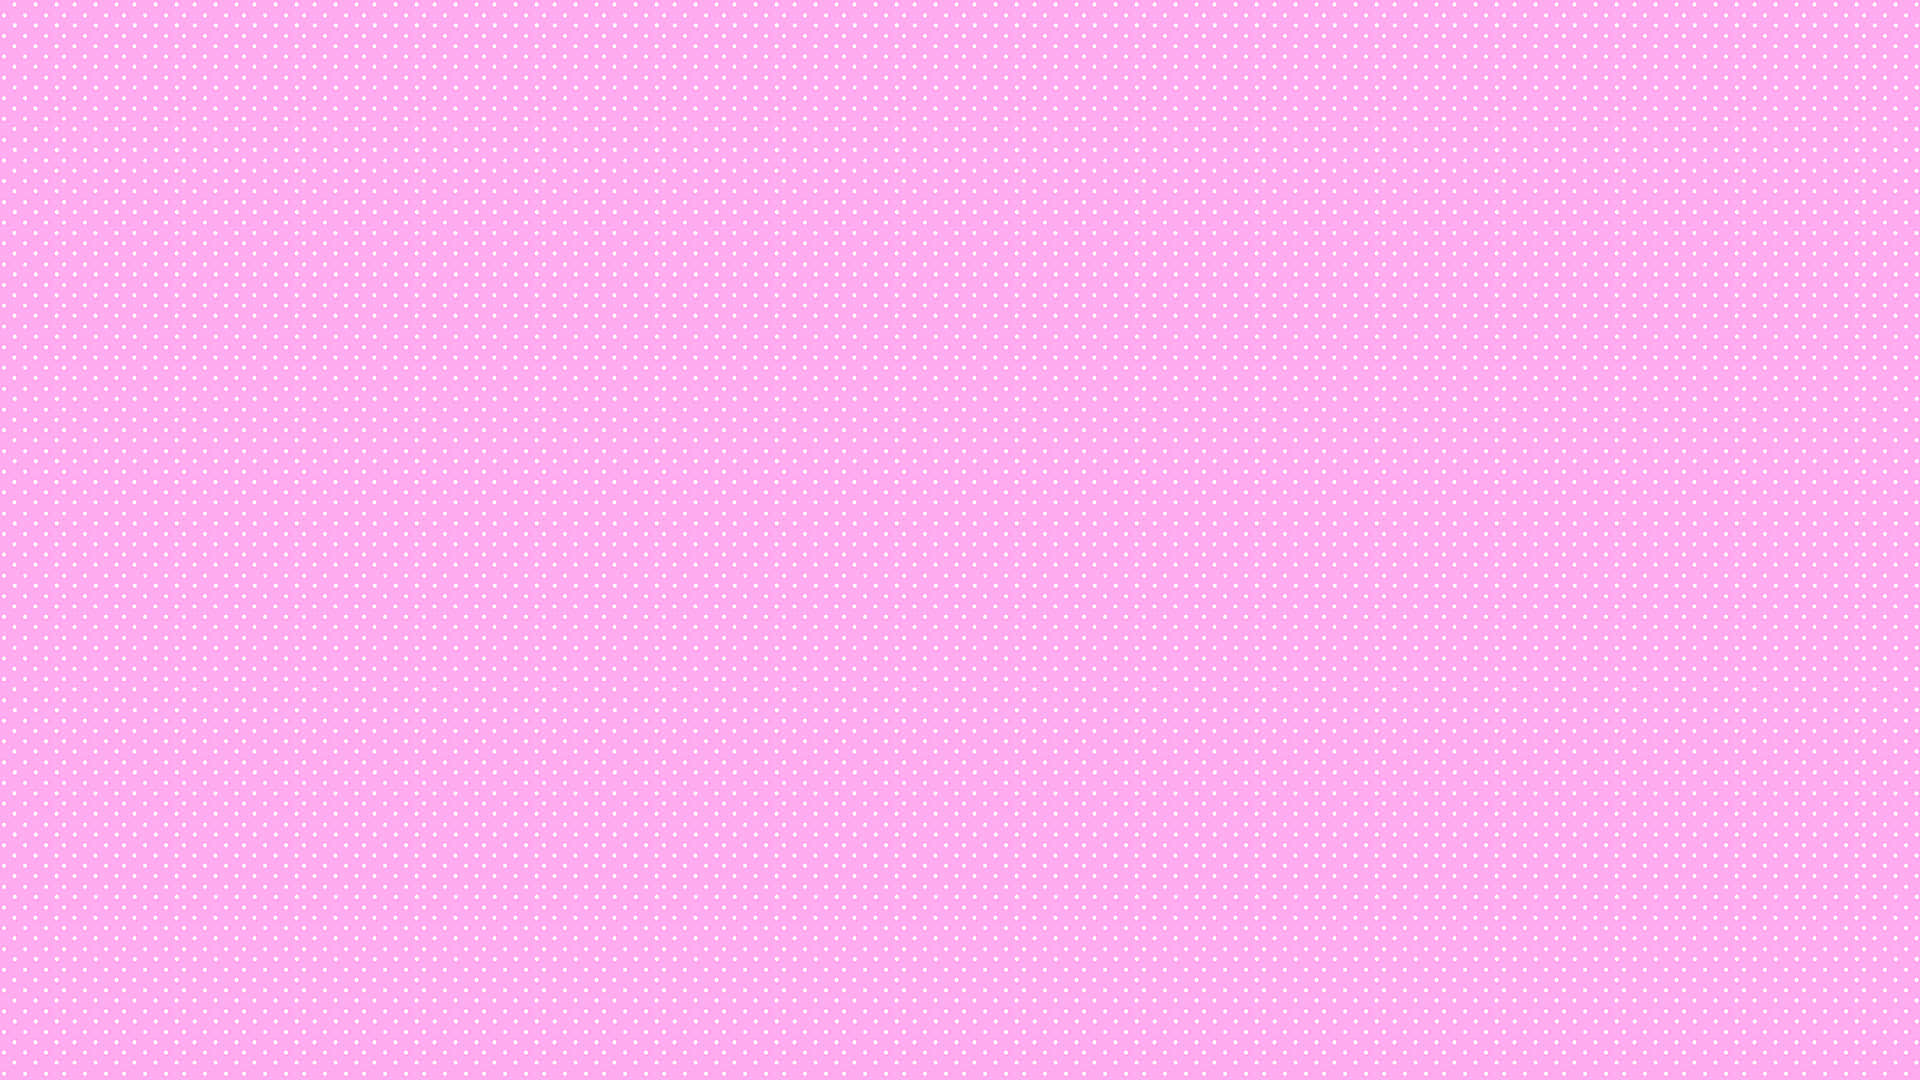 Download A Pink Background With A White Background Wallpaper ...